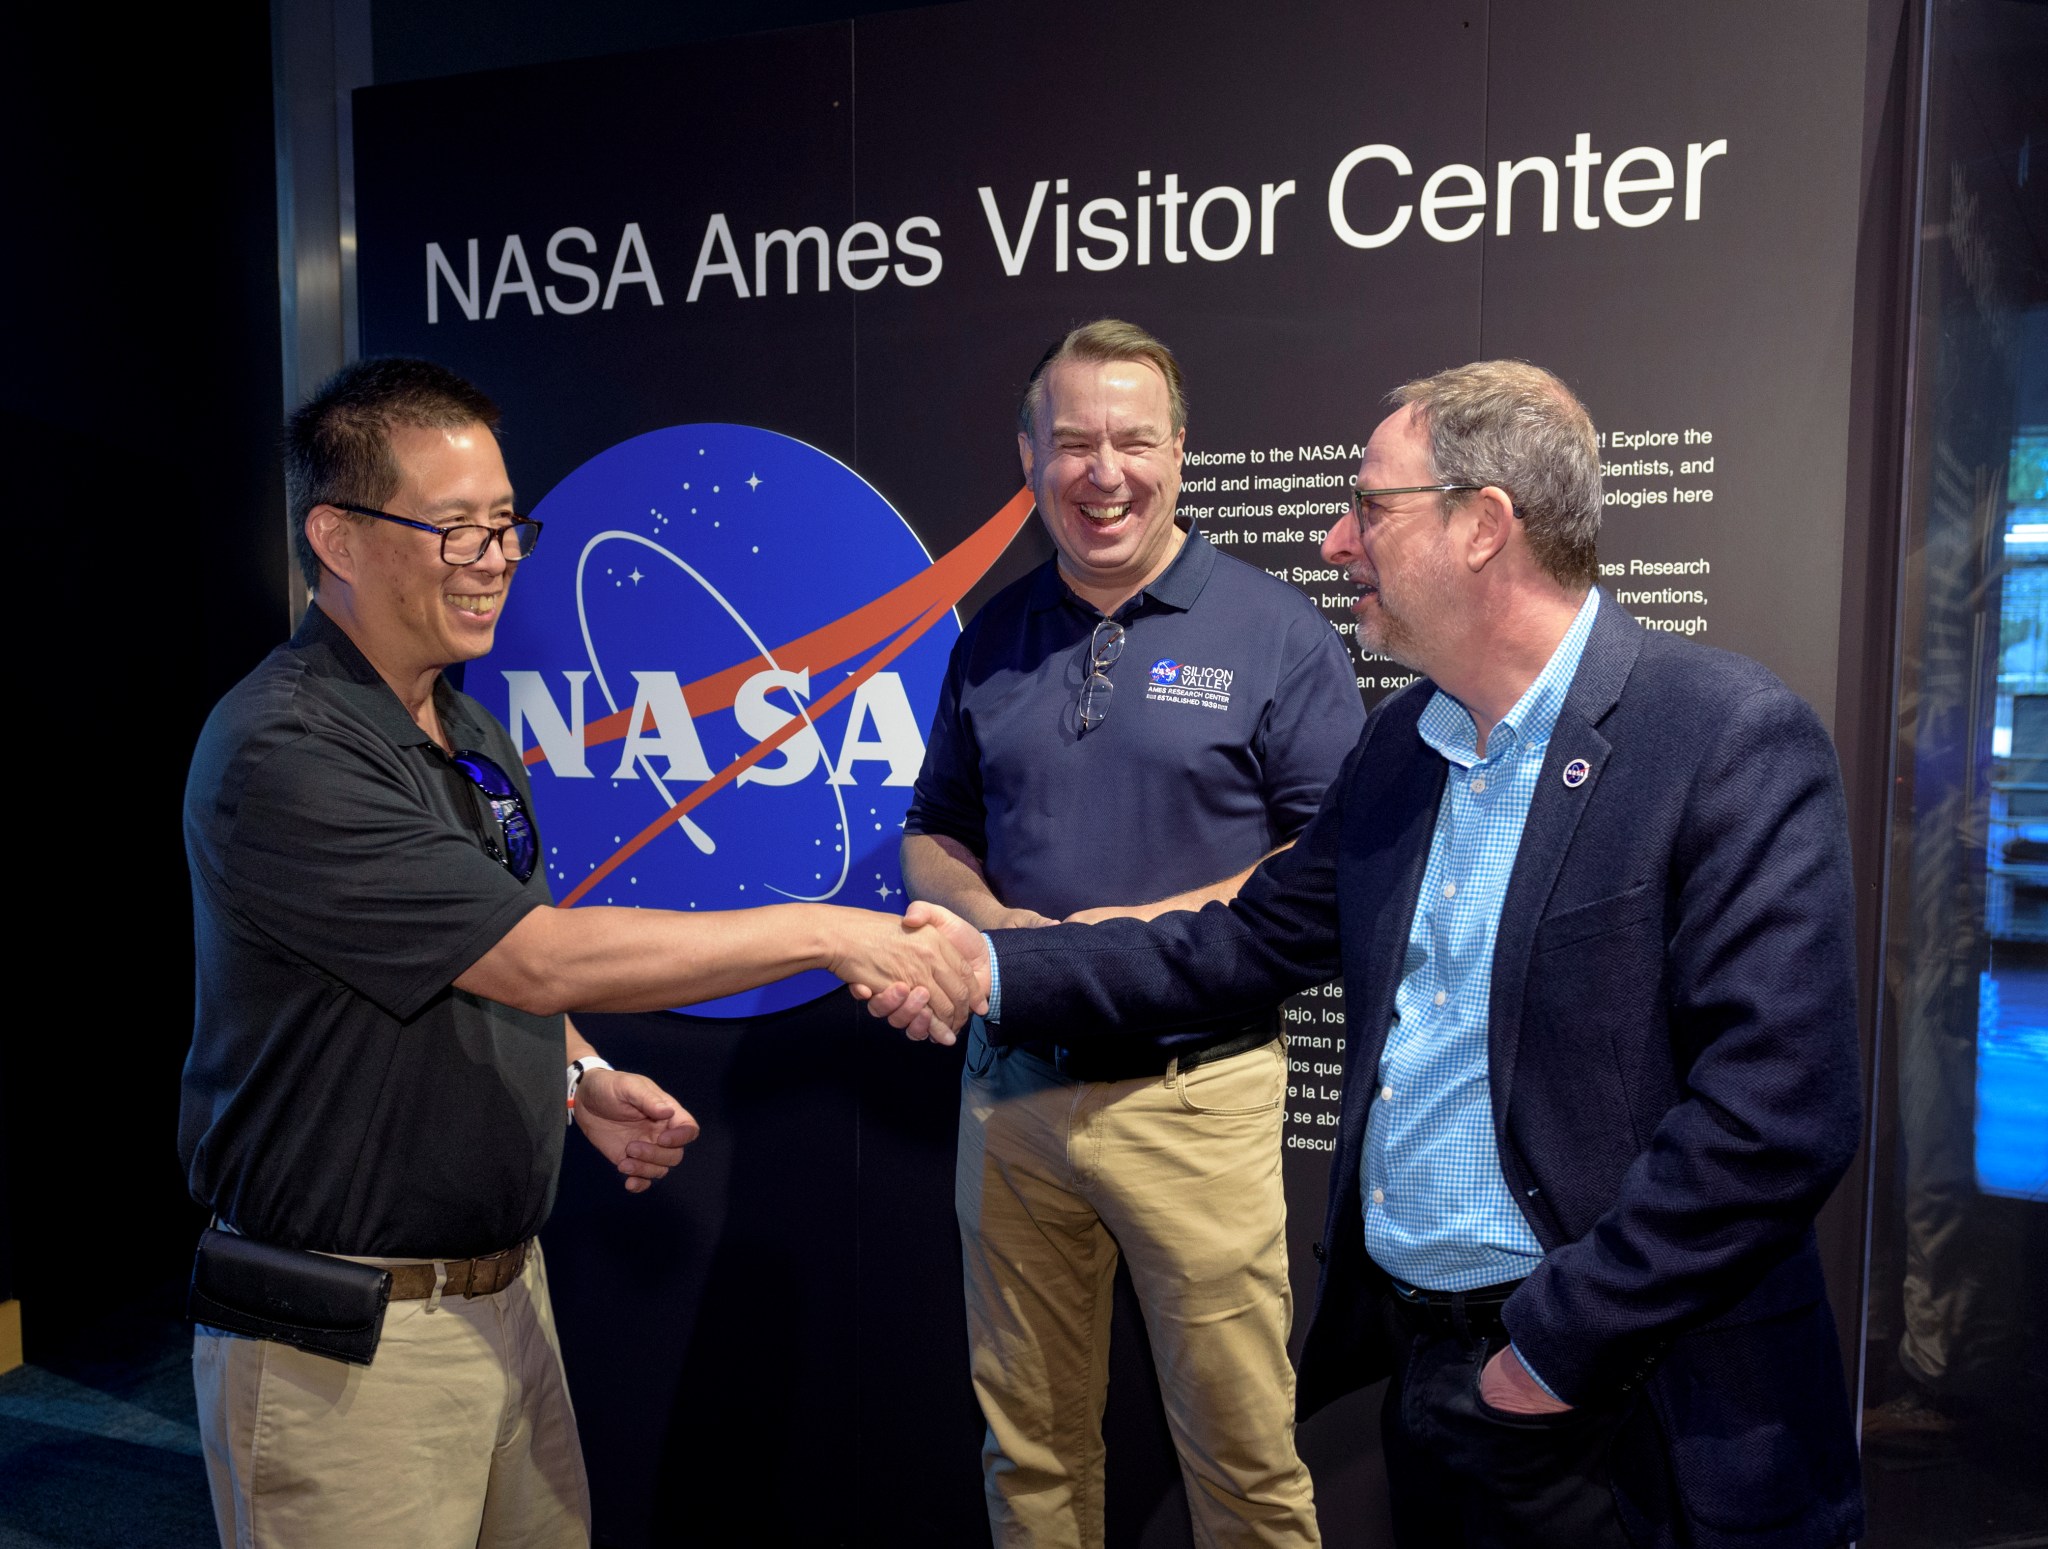 NASA Ames Center Director Eugene Tu, left, shakes hands with Chabot Space & Science Center director Adam Tobin, right, while NASA Ames deputy center director David Korsmeyer, center, looks on. The three individuals are standing in front of the entrance to the NASA Ames Visitor Center exhibit with the NASA meatball logo behind them.